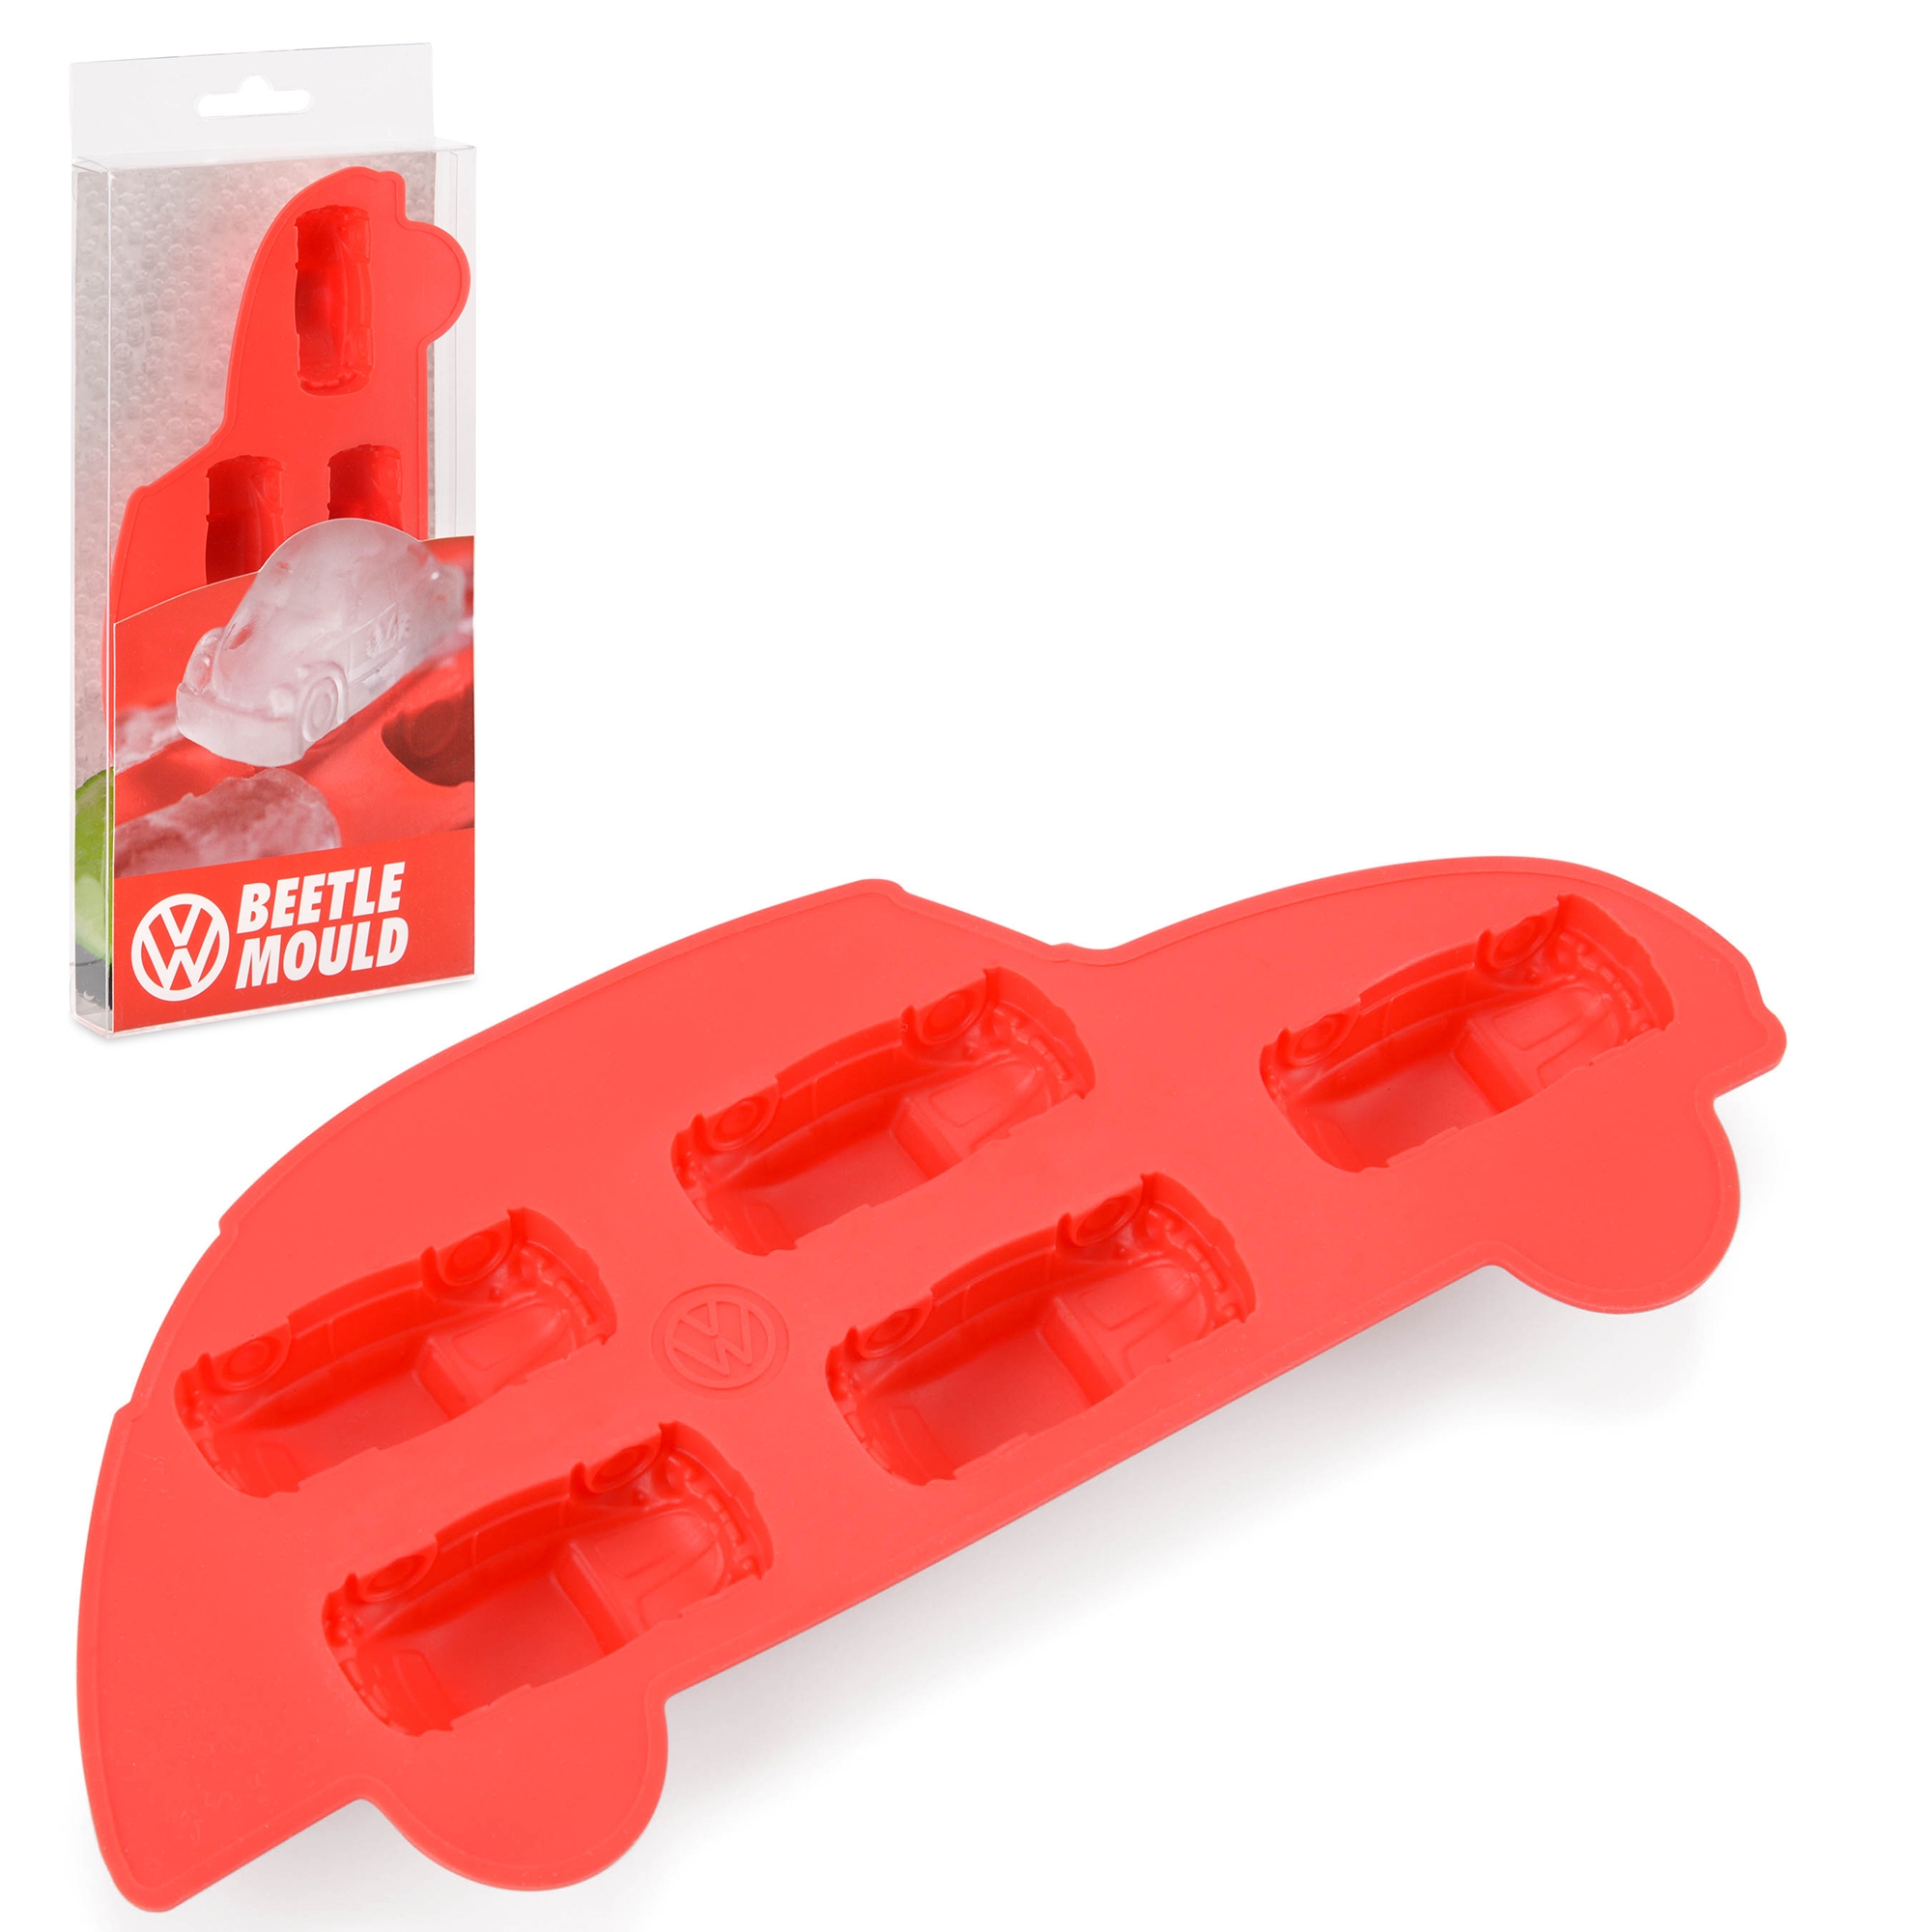 Board Masters Volkswagen Ice Cube Tray with VW Camper Van Shape Cubes 4 Cube Silicone Mould Ice Tray 